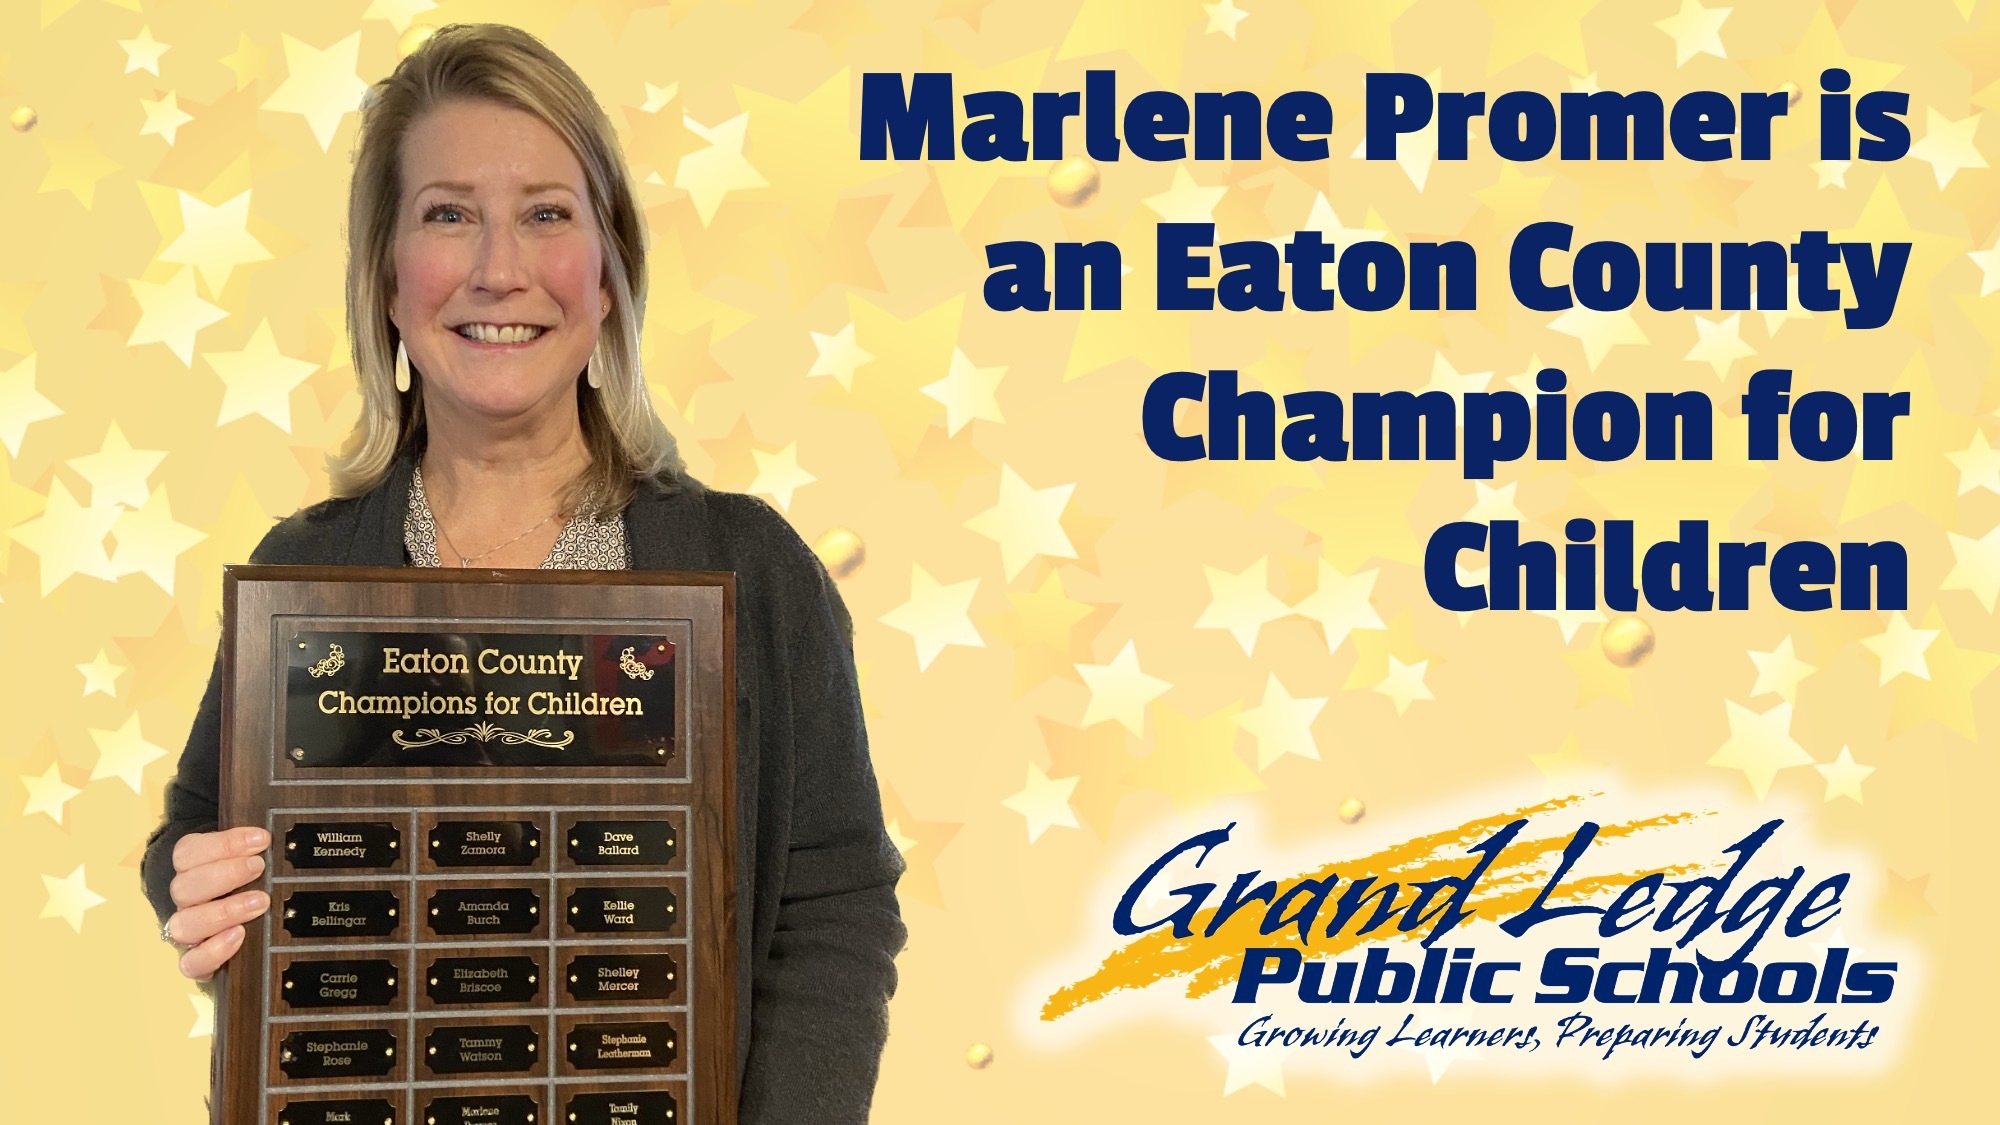 Marlene Promer is an Eaton County Champion for Children